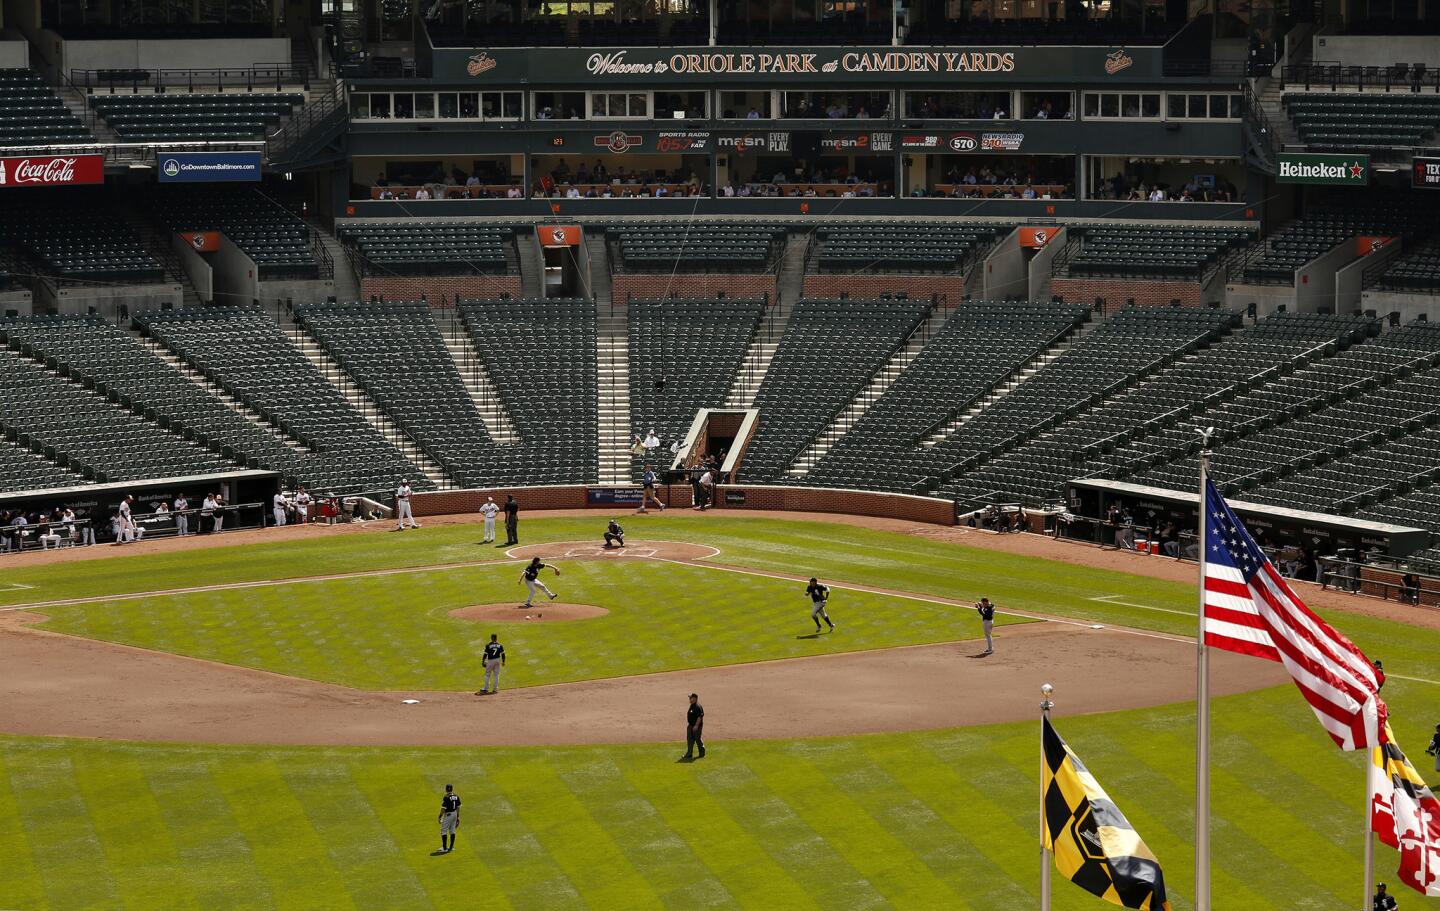 No fans were allowed to attend the Orioles game Camden Yards due to unrest in the city.